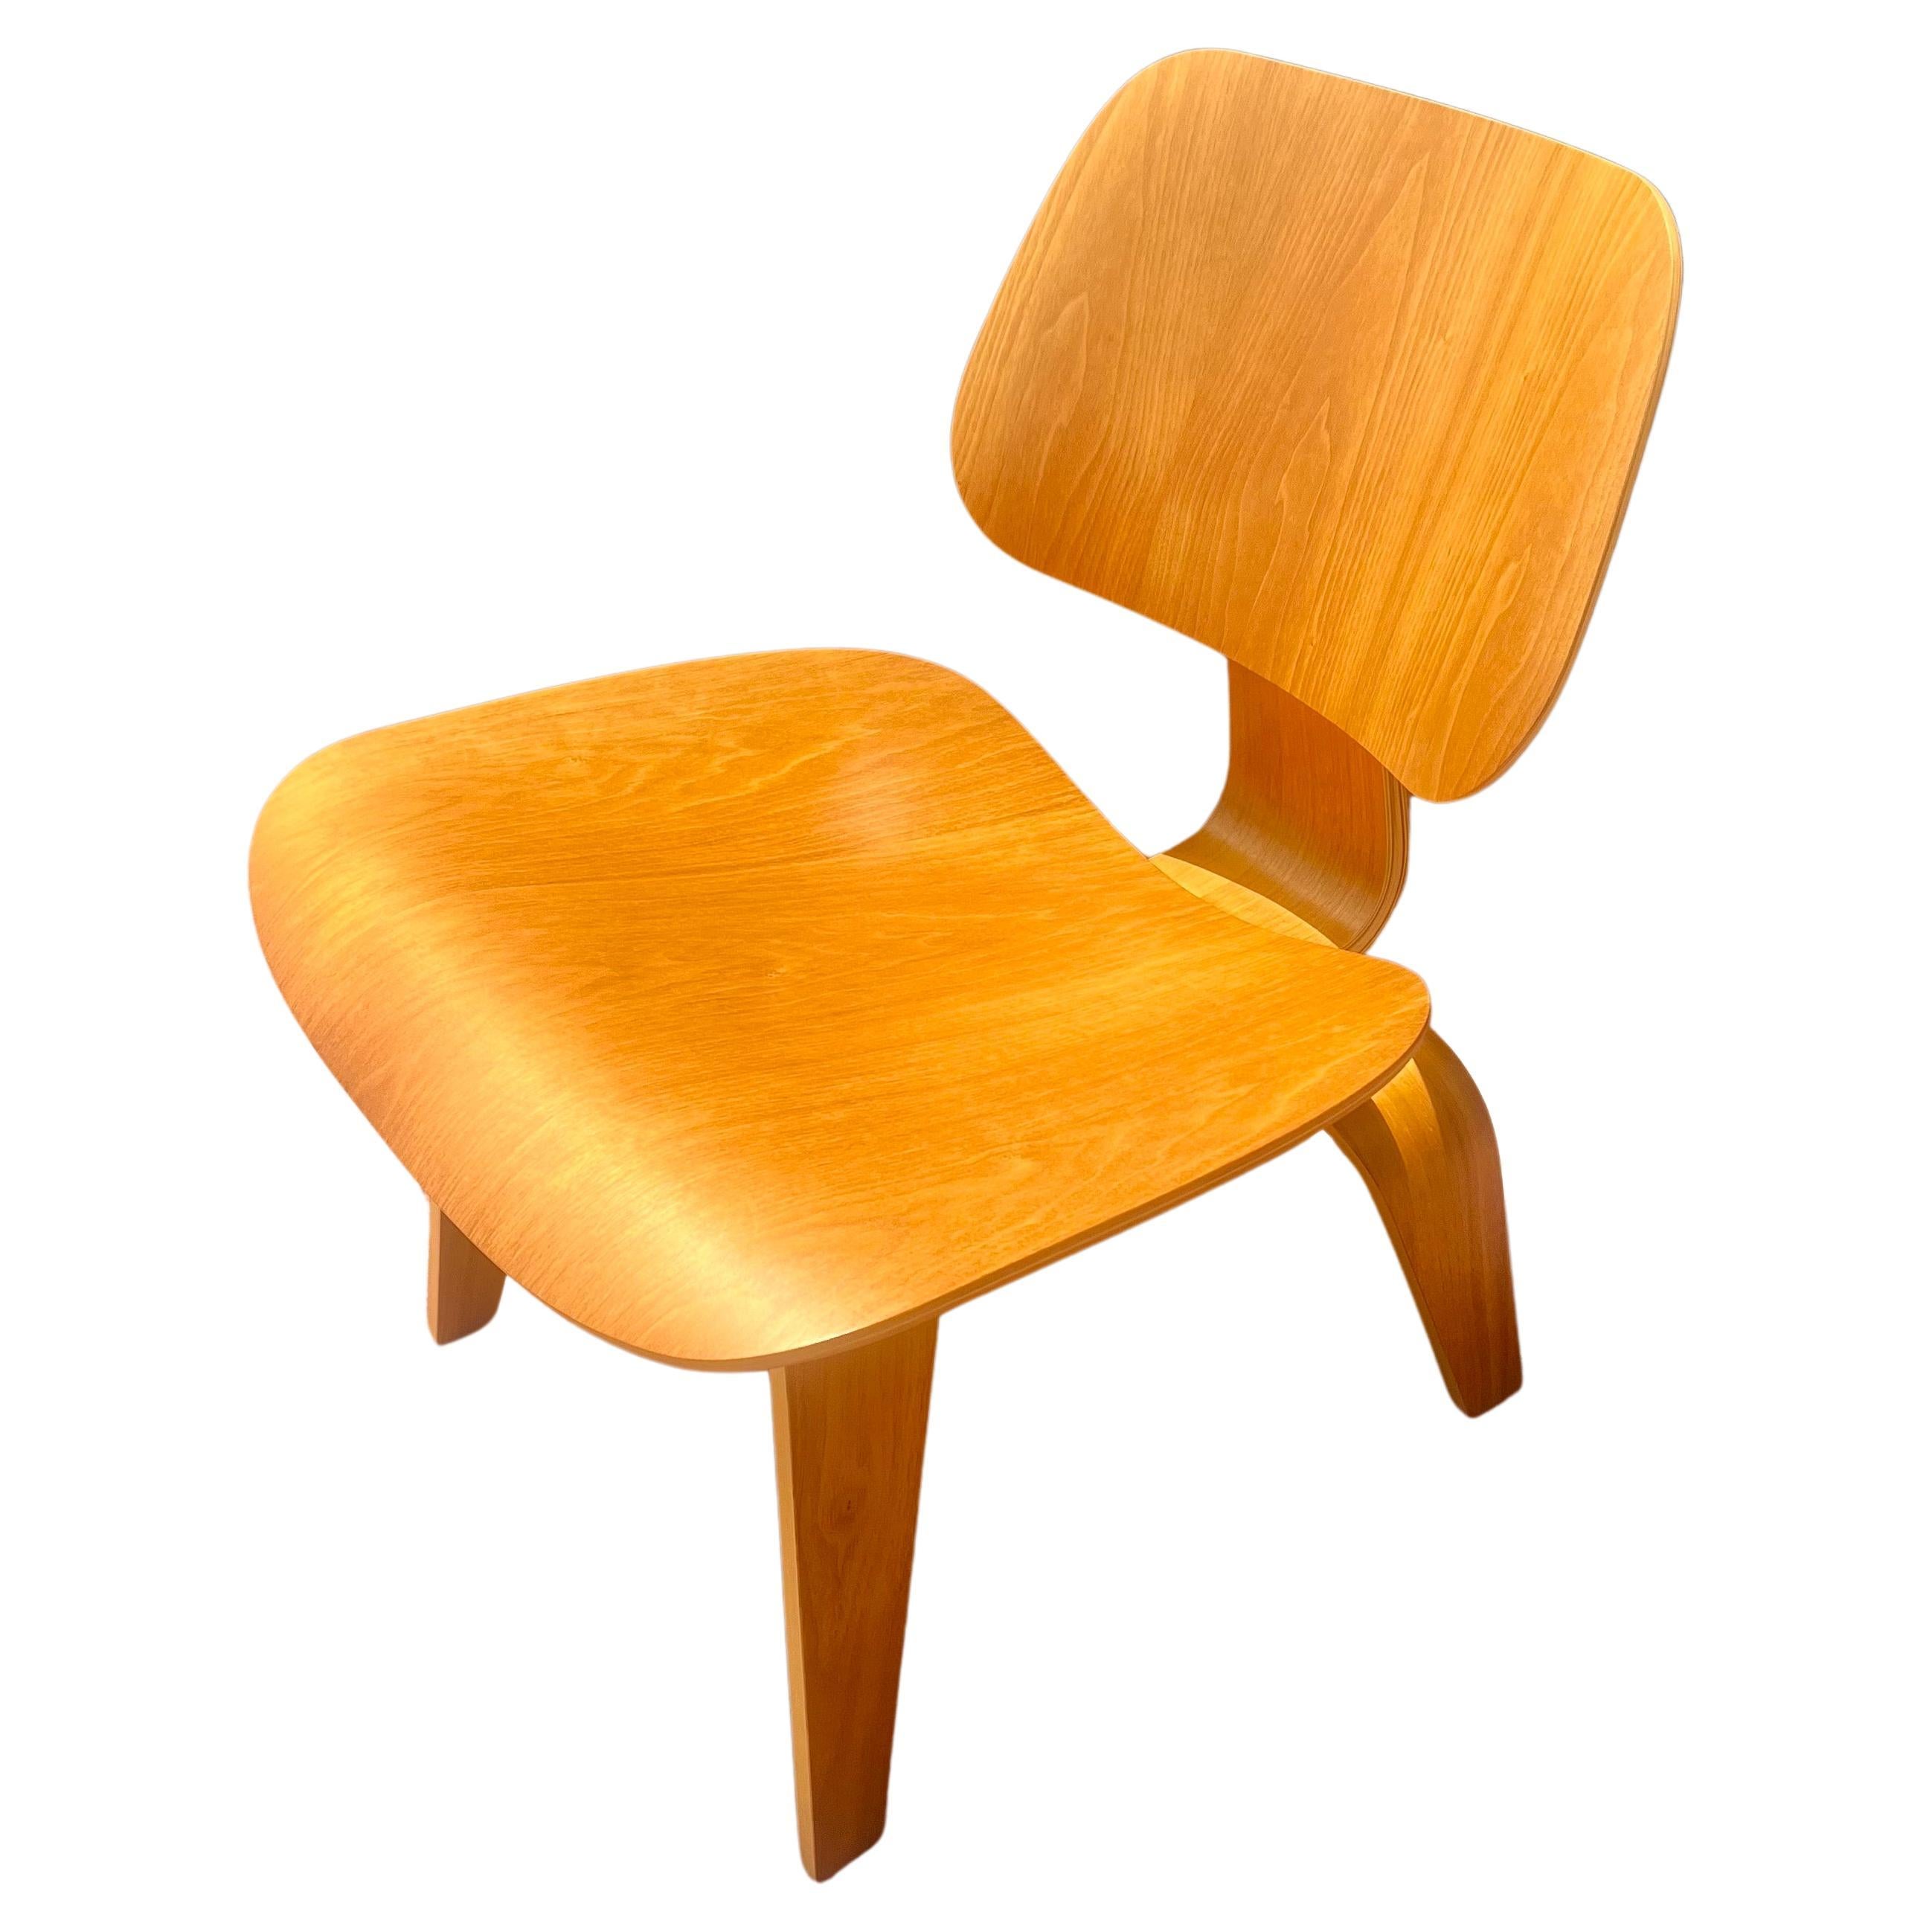 Mid-Century Modern Iconic Pair of LCW Chairs Designed by Charles Eames for Herman Miller